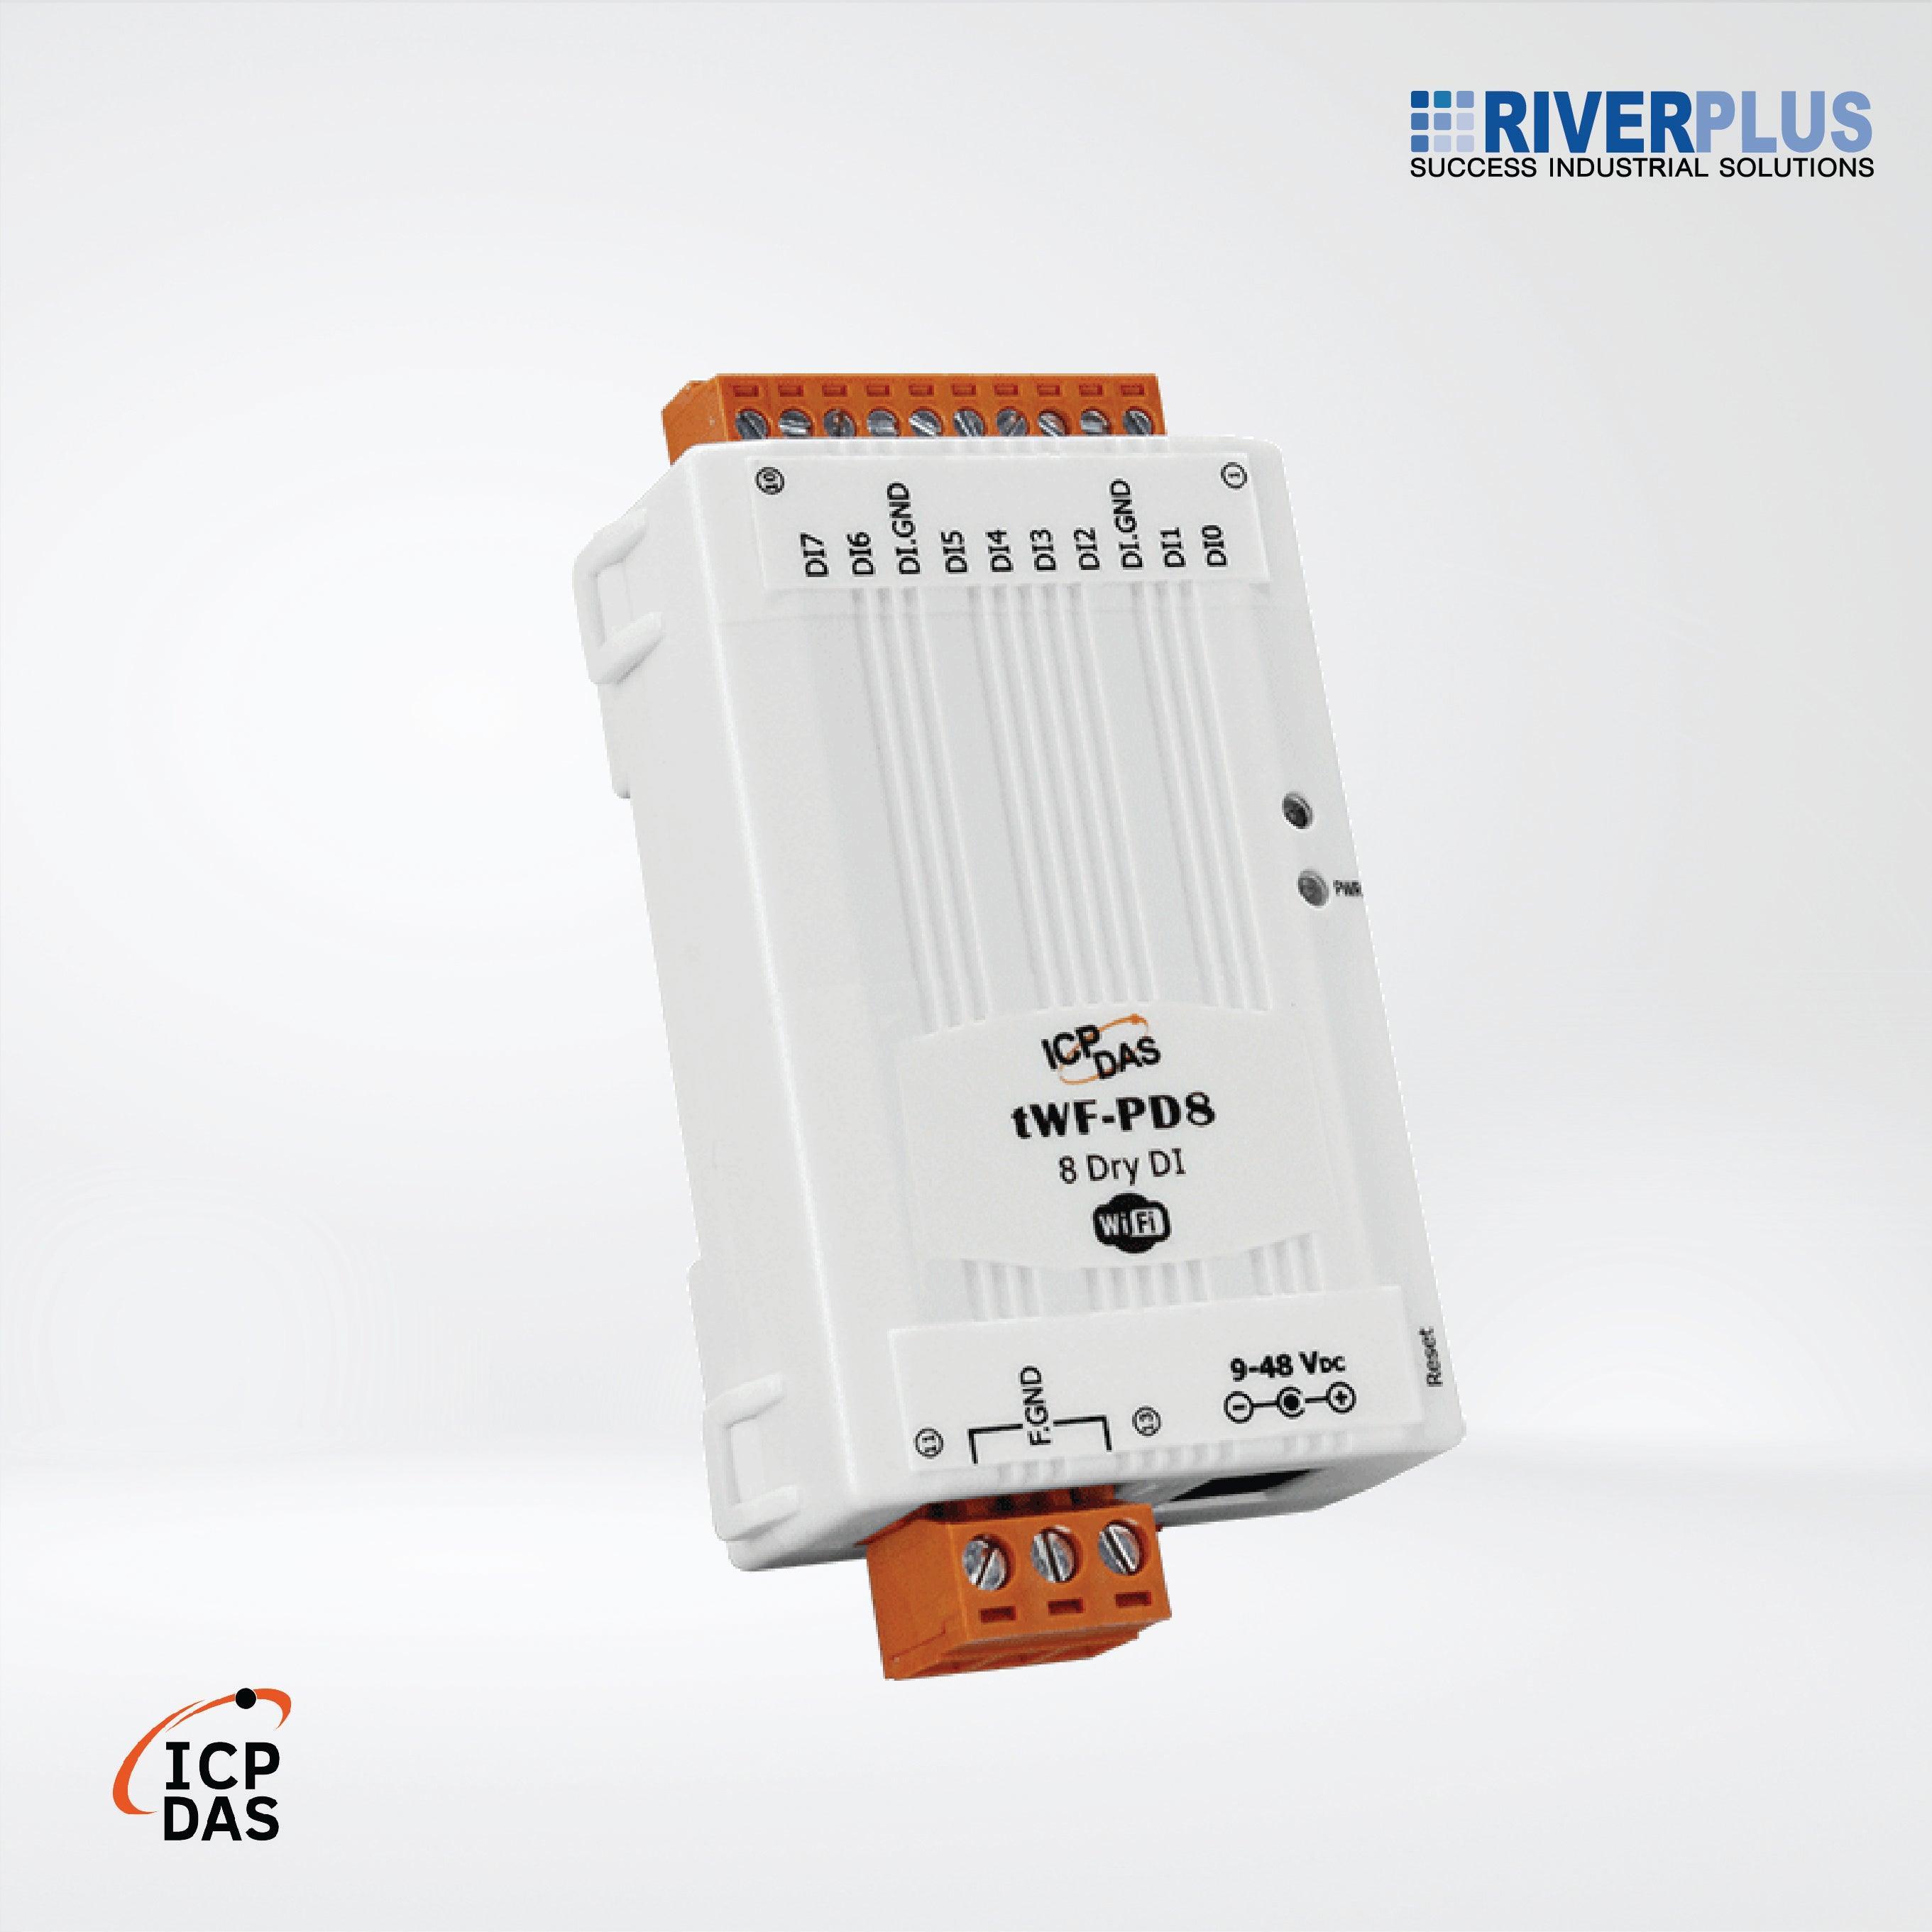 tWF-PD8 Tiny Wi-Fi I/O Module with Isolated 8-ch (Dry) DI (Asia Only) - Riverplus